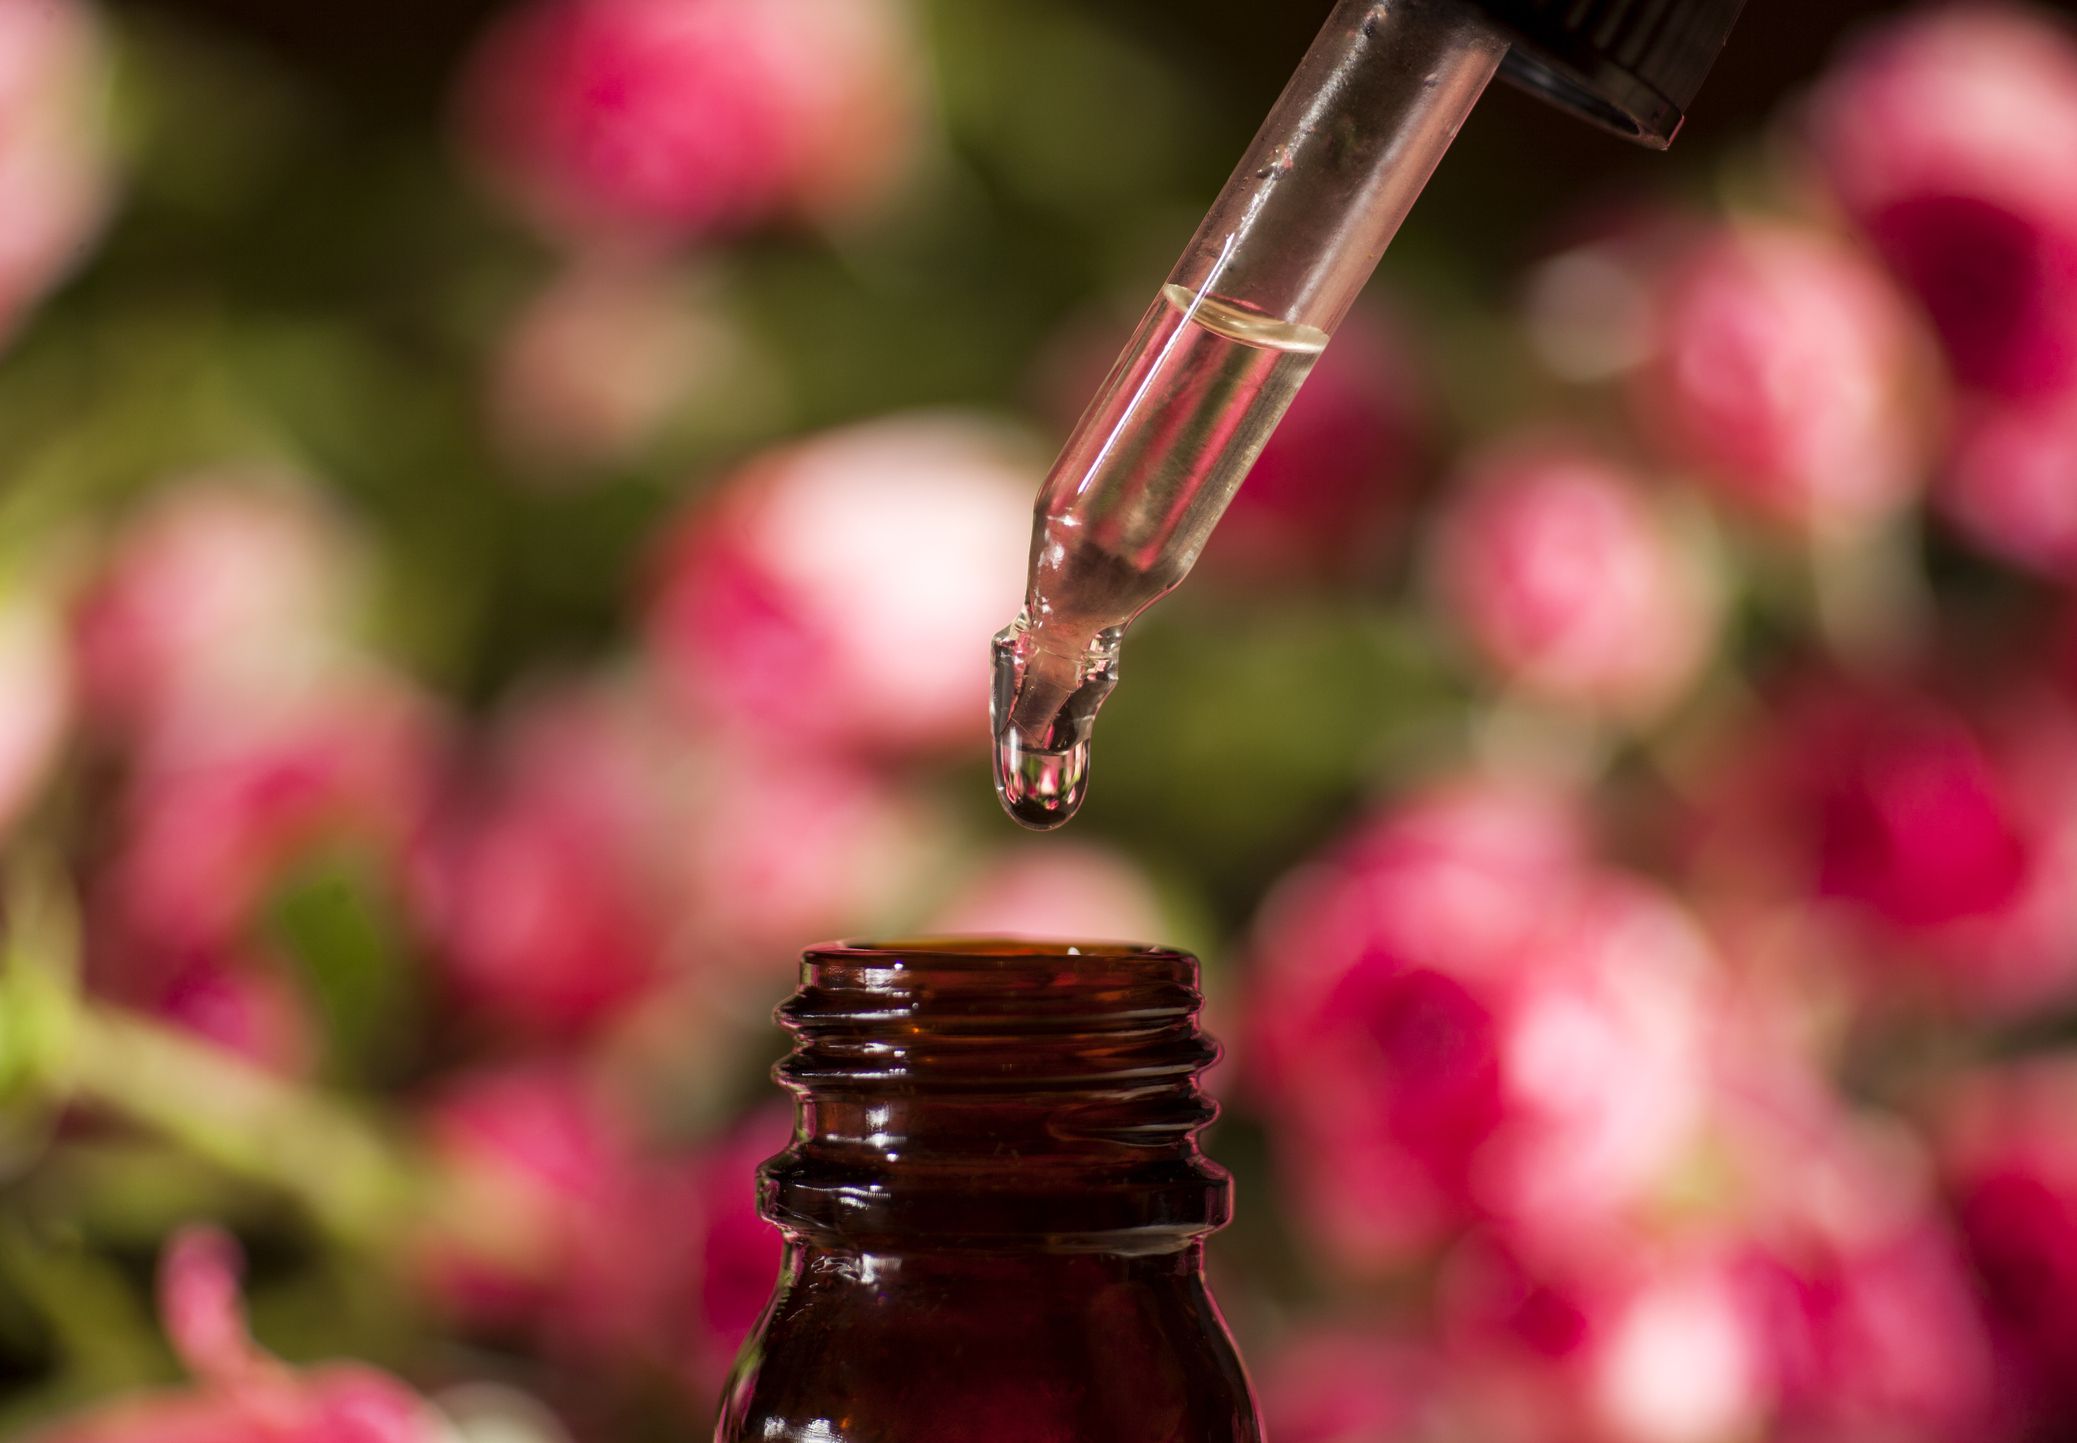 Rose essential oil is a favorite